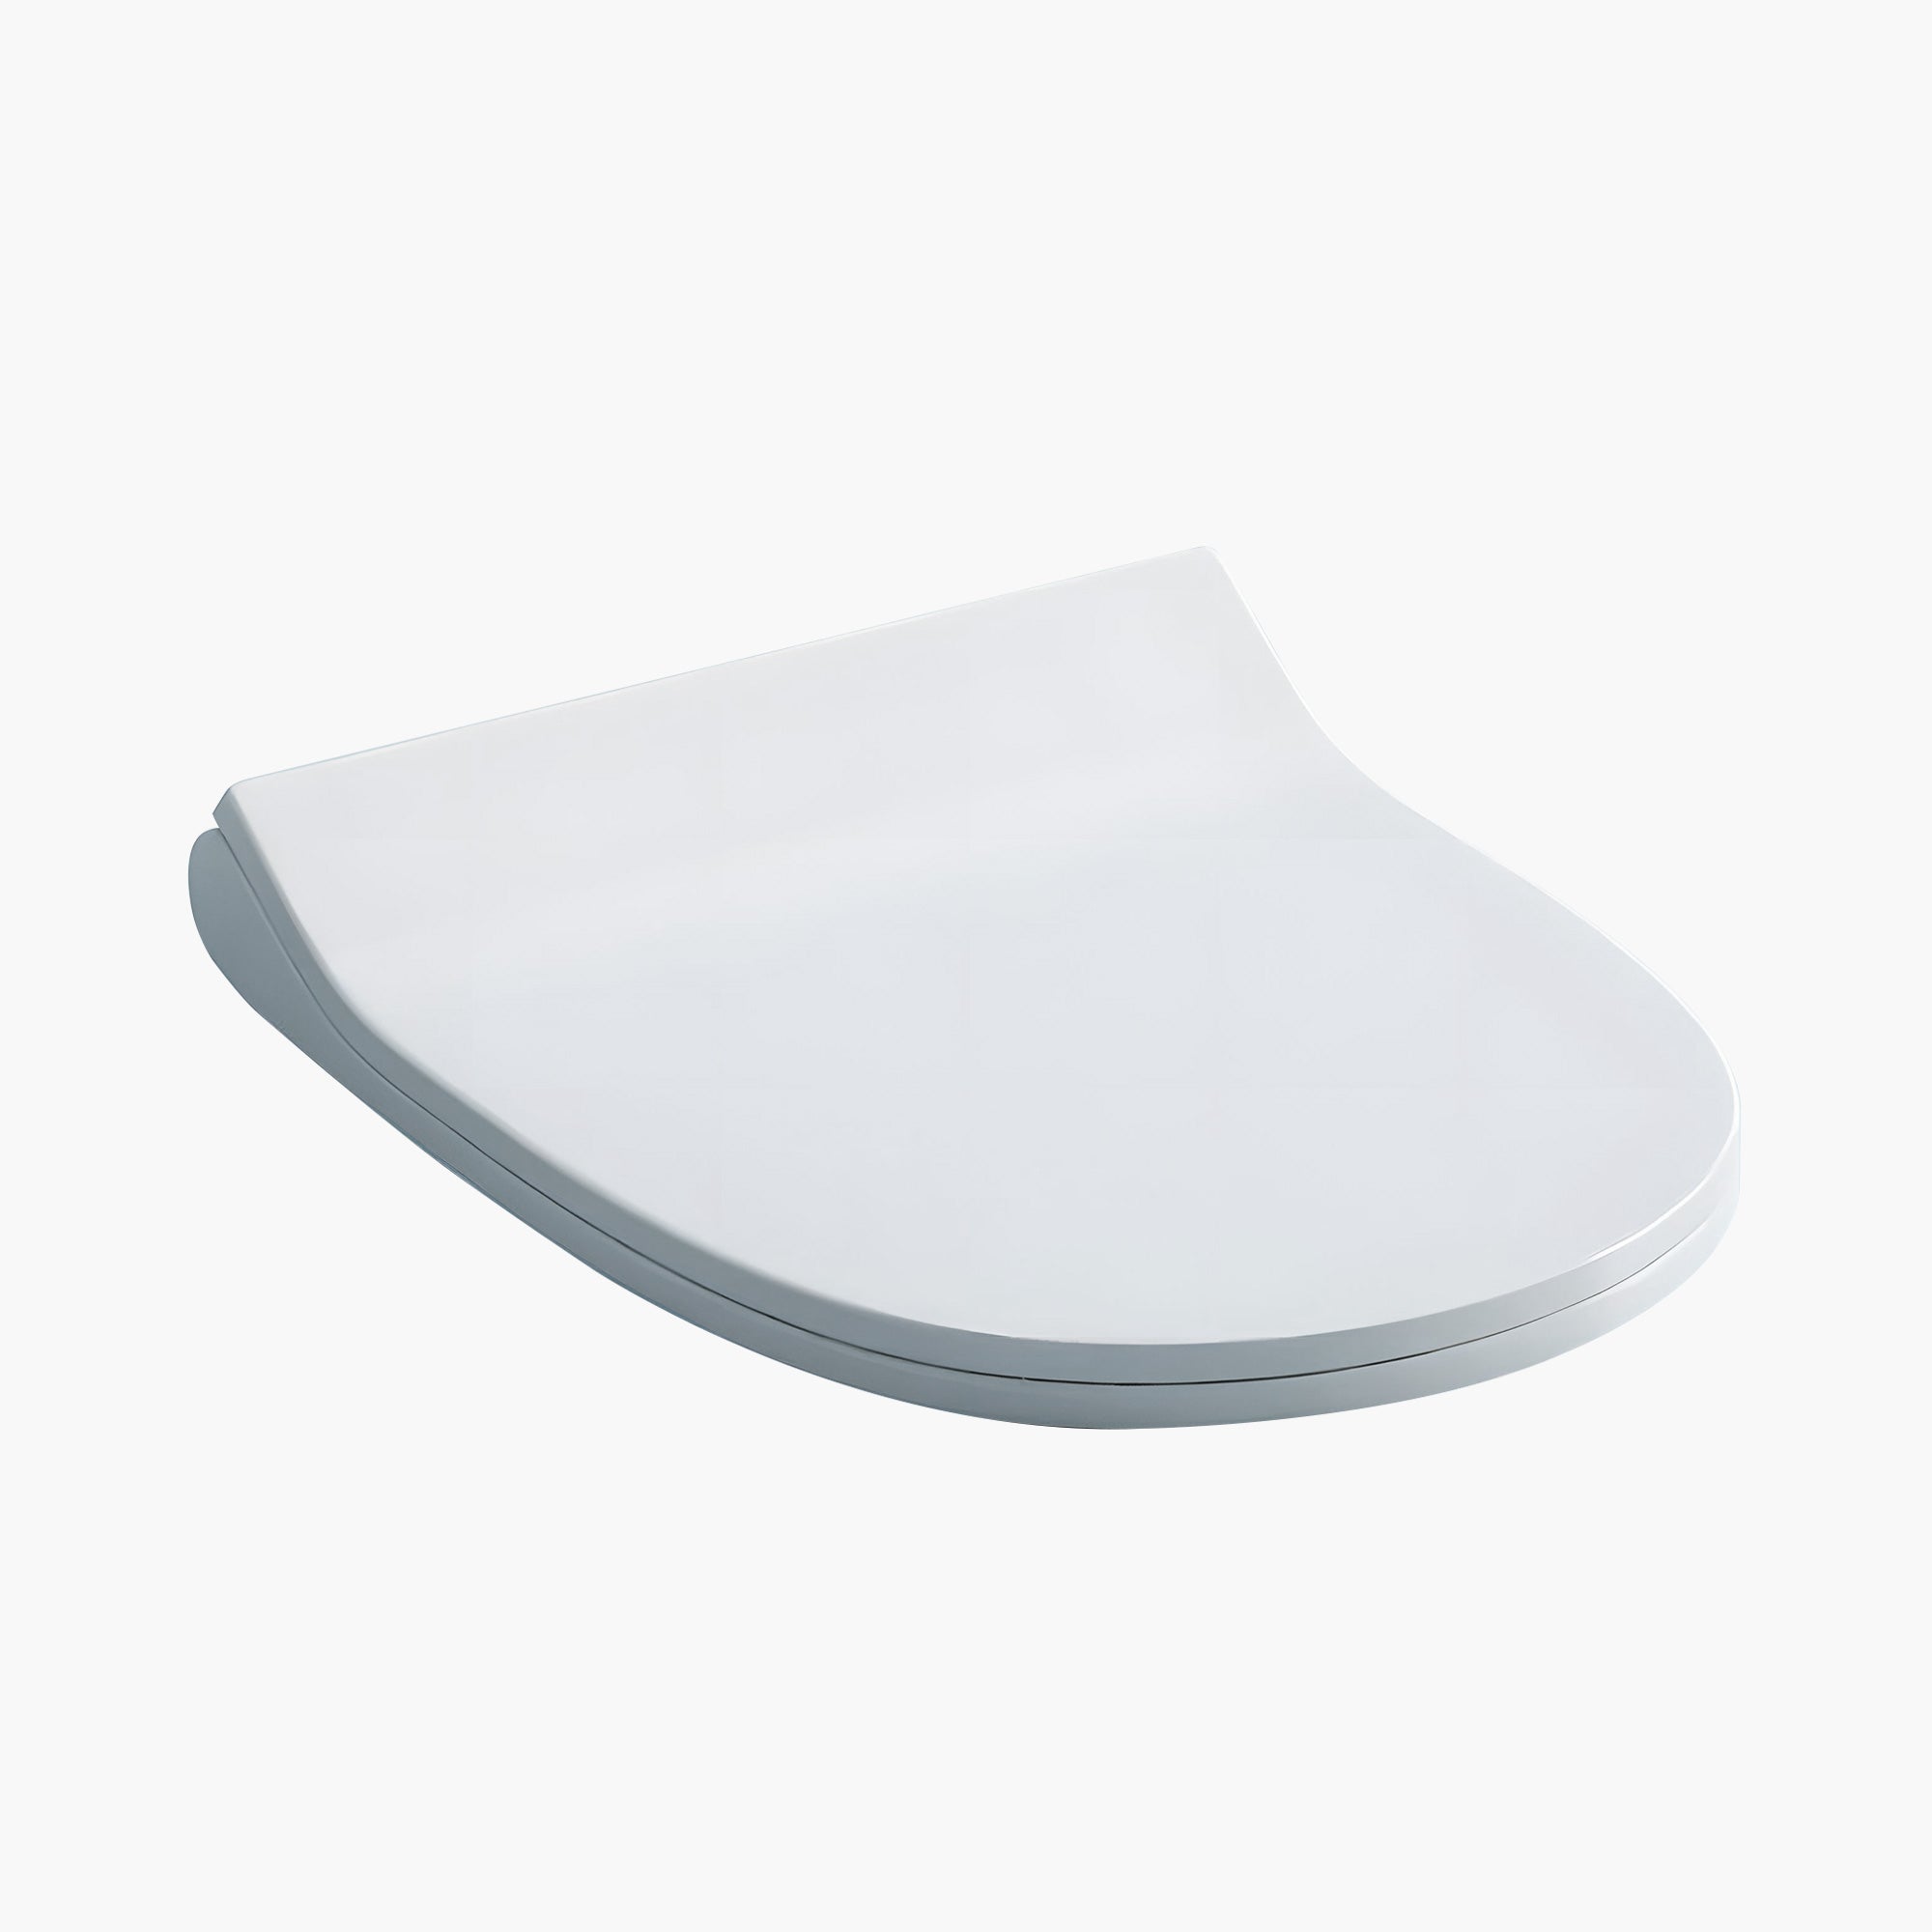 HOROW Round toilet seat With PP Material HWPP-8733-B